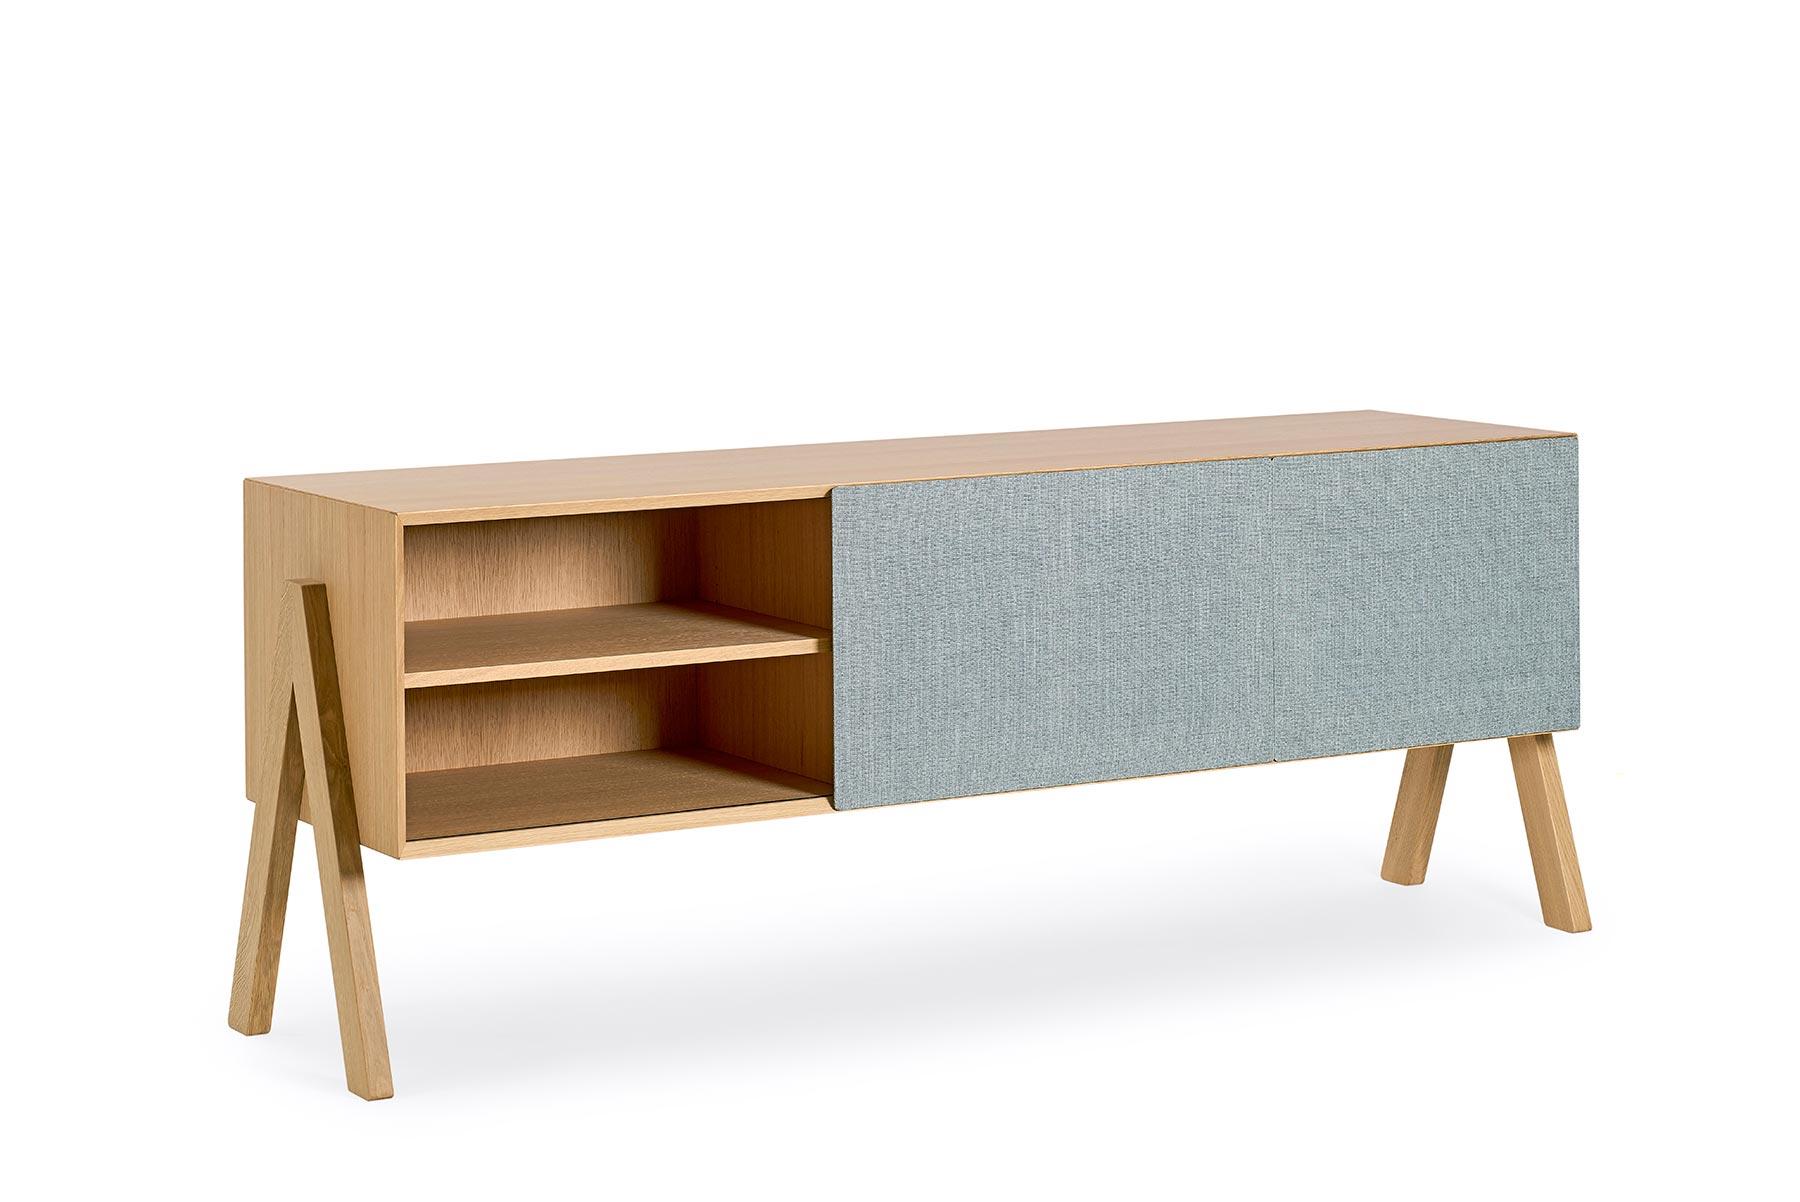 Designed by Friis & Moltke in 2017, this Minimalist’s credenza features exterior mounted V- legs with two cloth cabinet doors that slide from one bay to the next. Crafted in solid wood, this credenza is hand built at GETAMA’s factory in Gedsted,